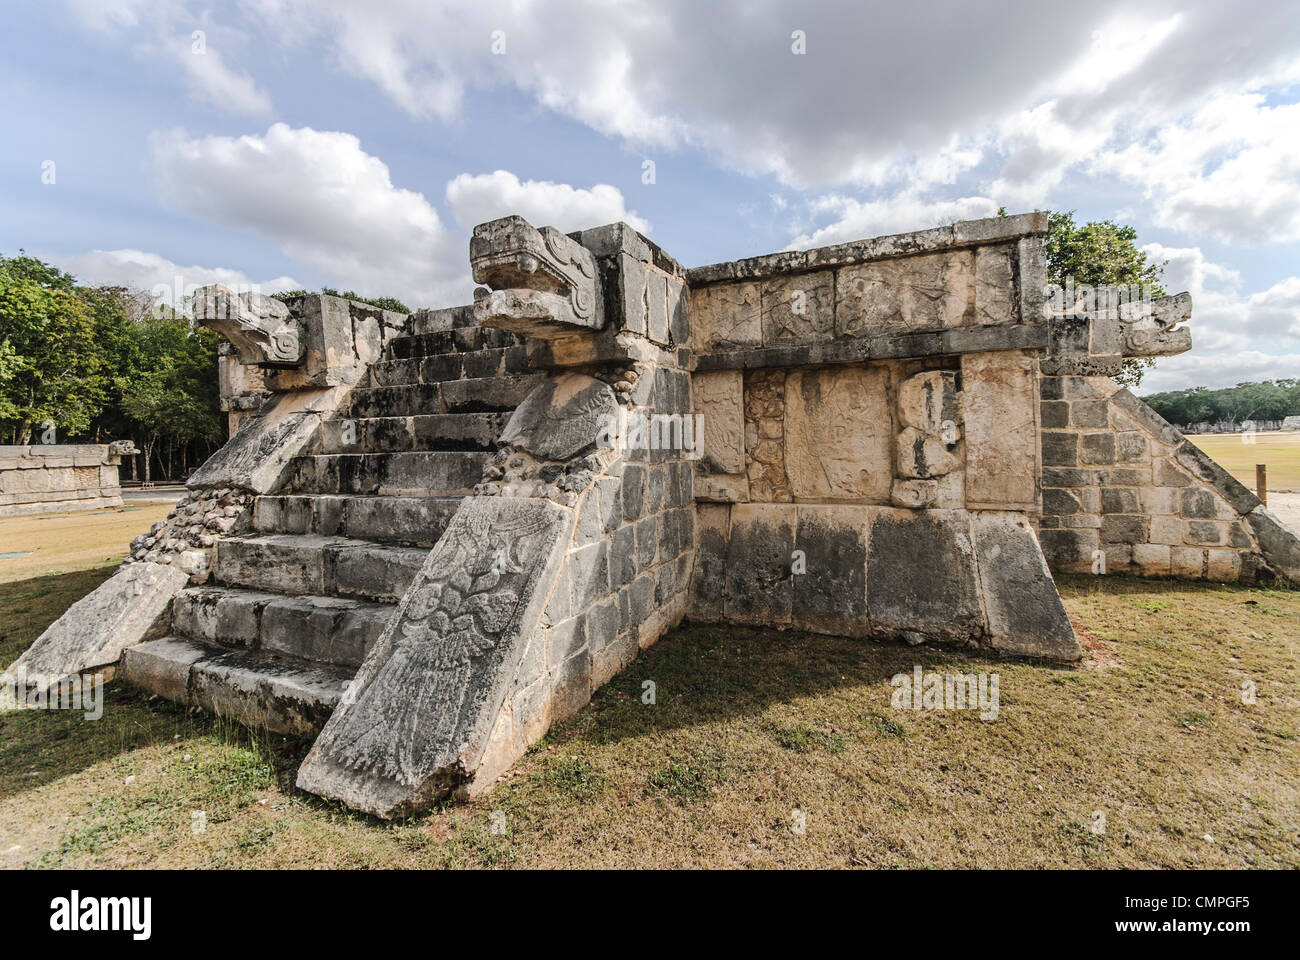 CHICHEN ITZA, Mexico - The Venus Platform, with stone jaguar heads on either side of the stairs at Chichen Itza, Mexico Stock Photo